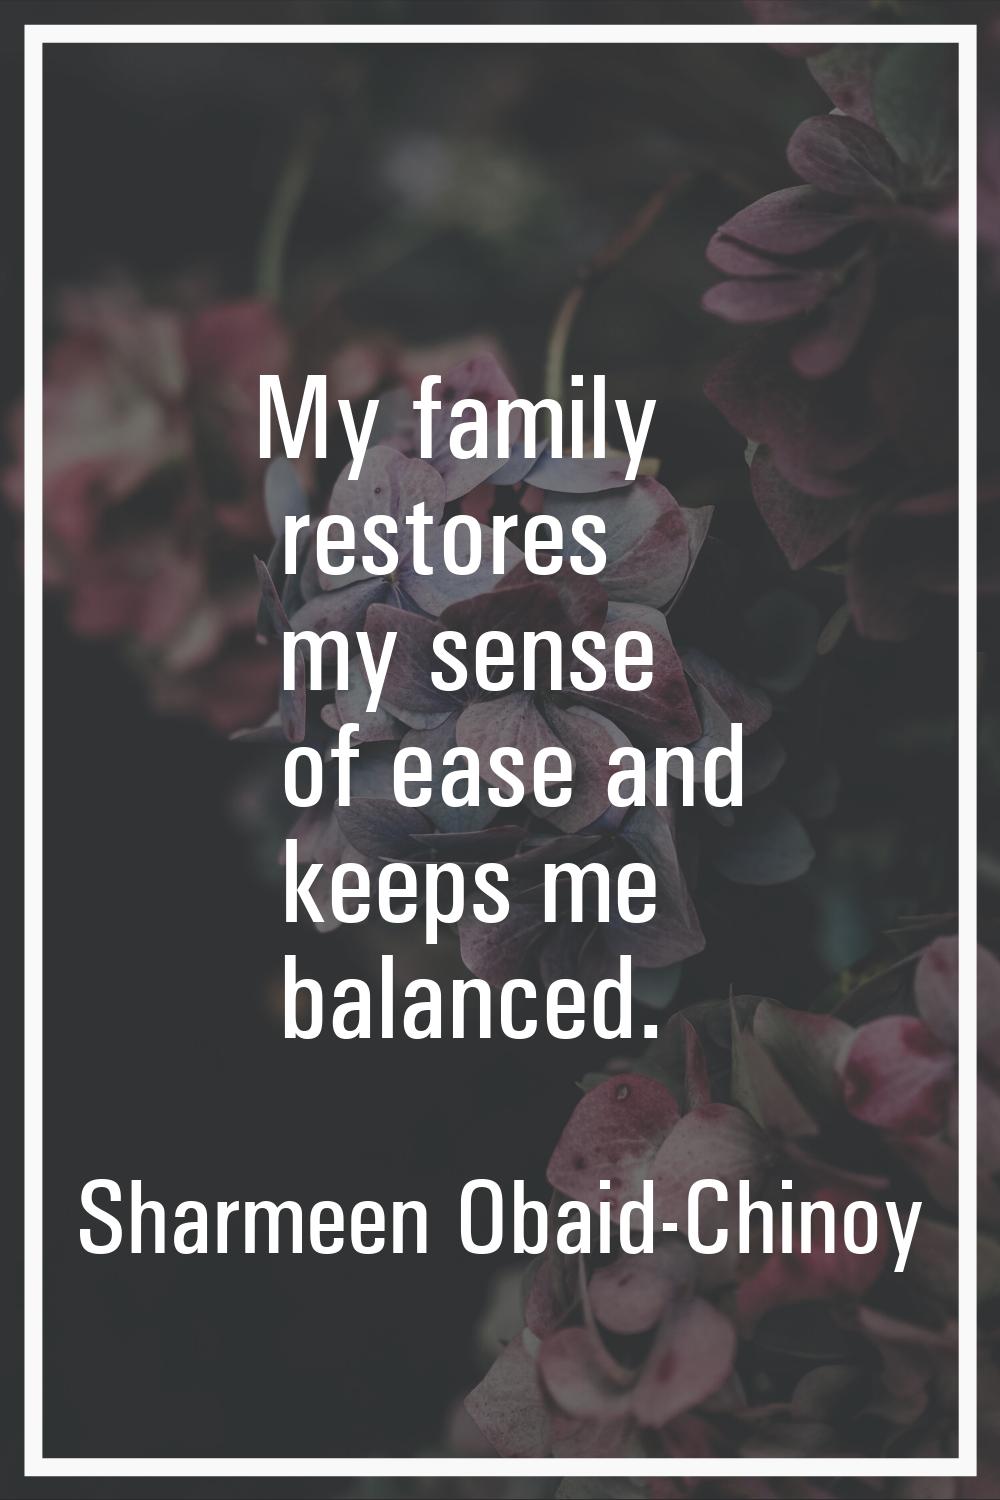 My family restores my sense of ease and keeps me balanced.